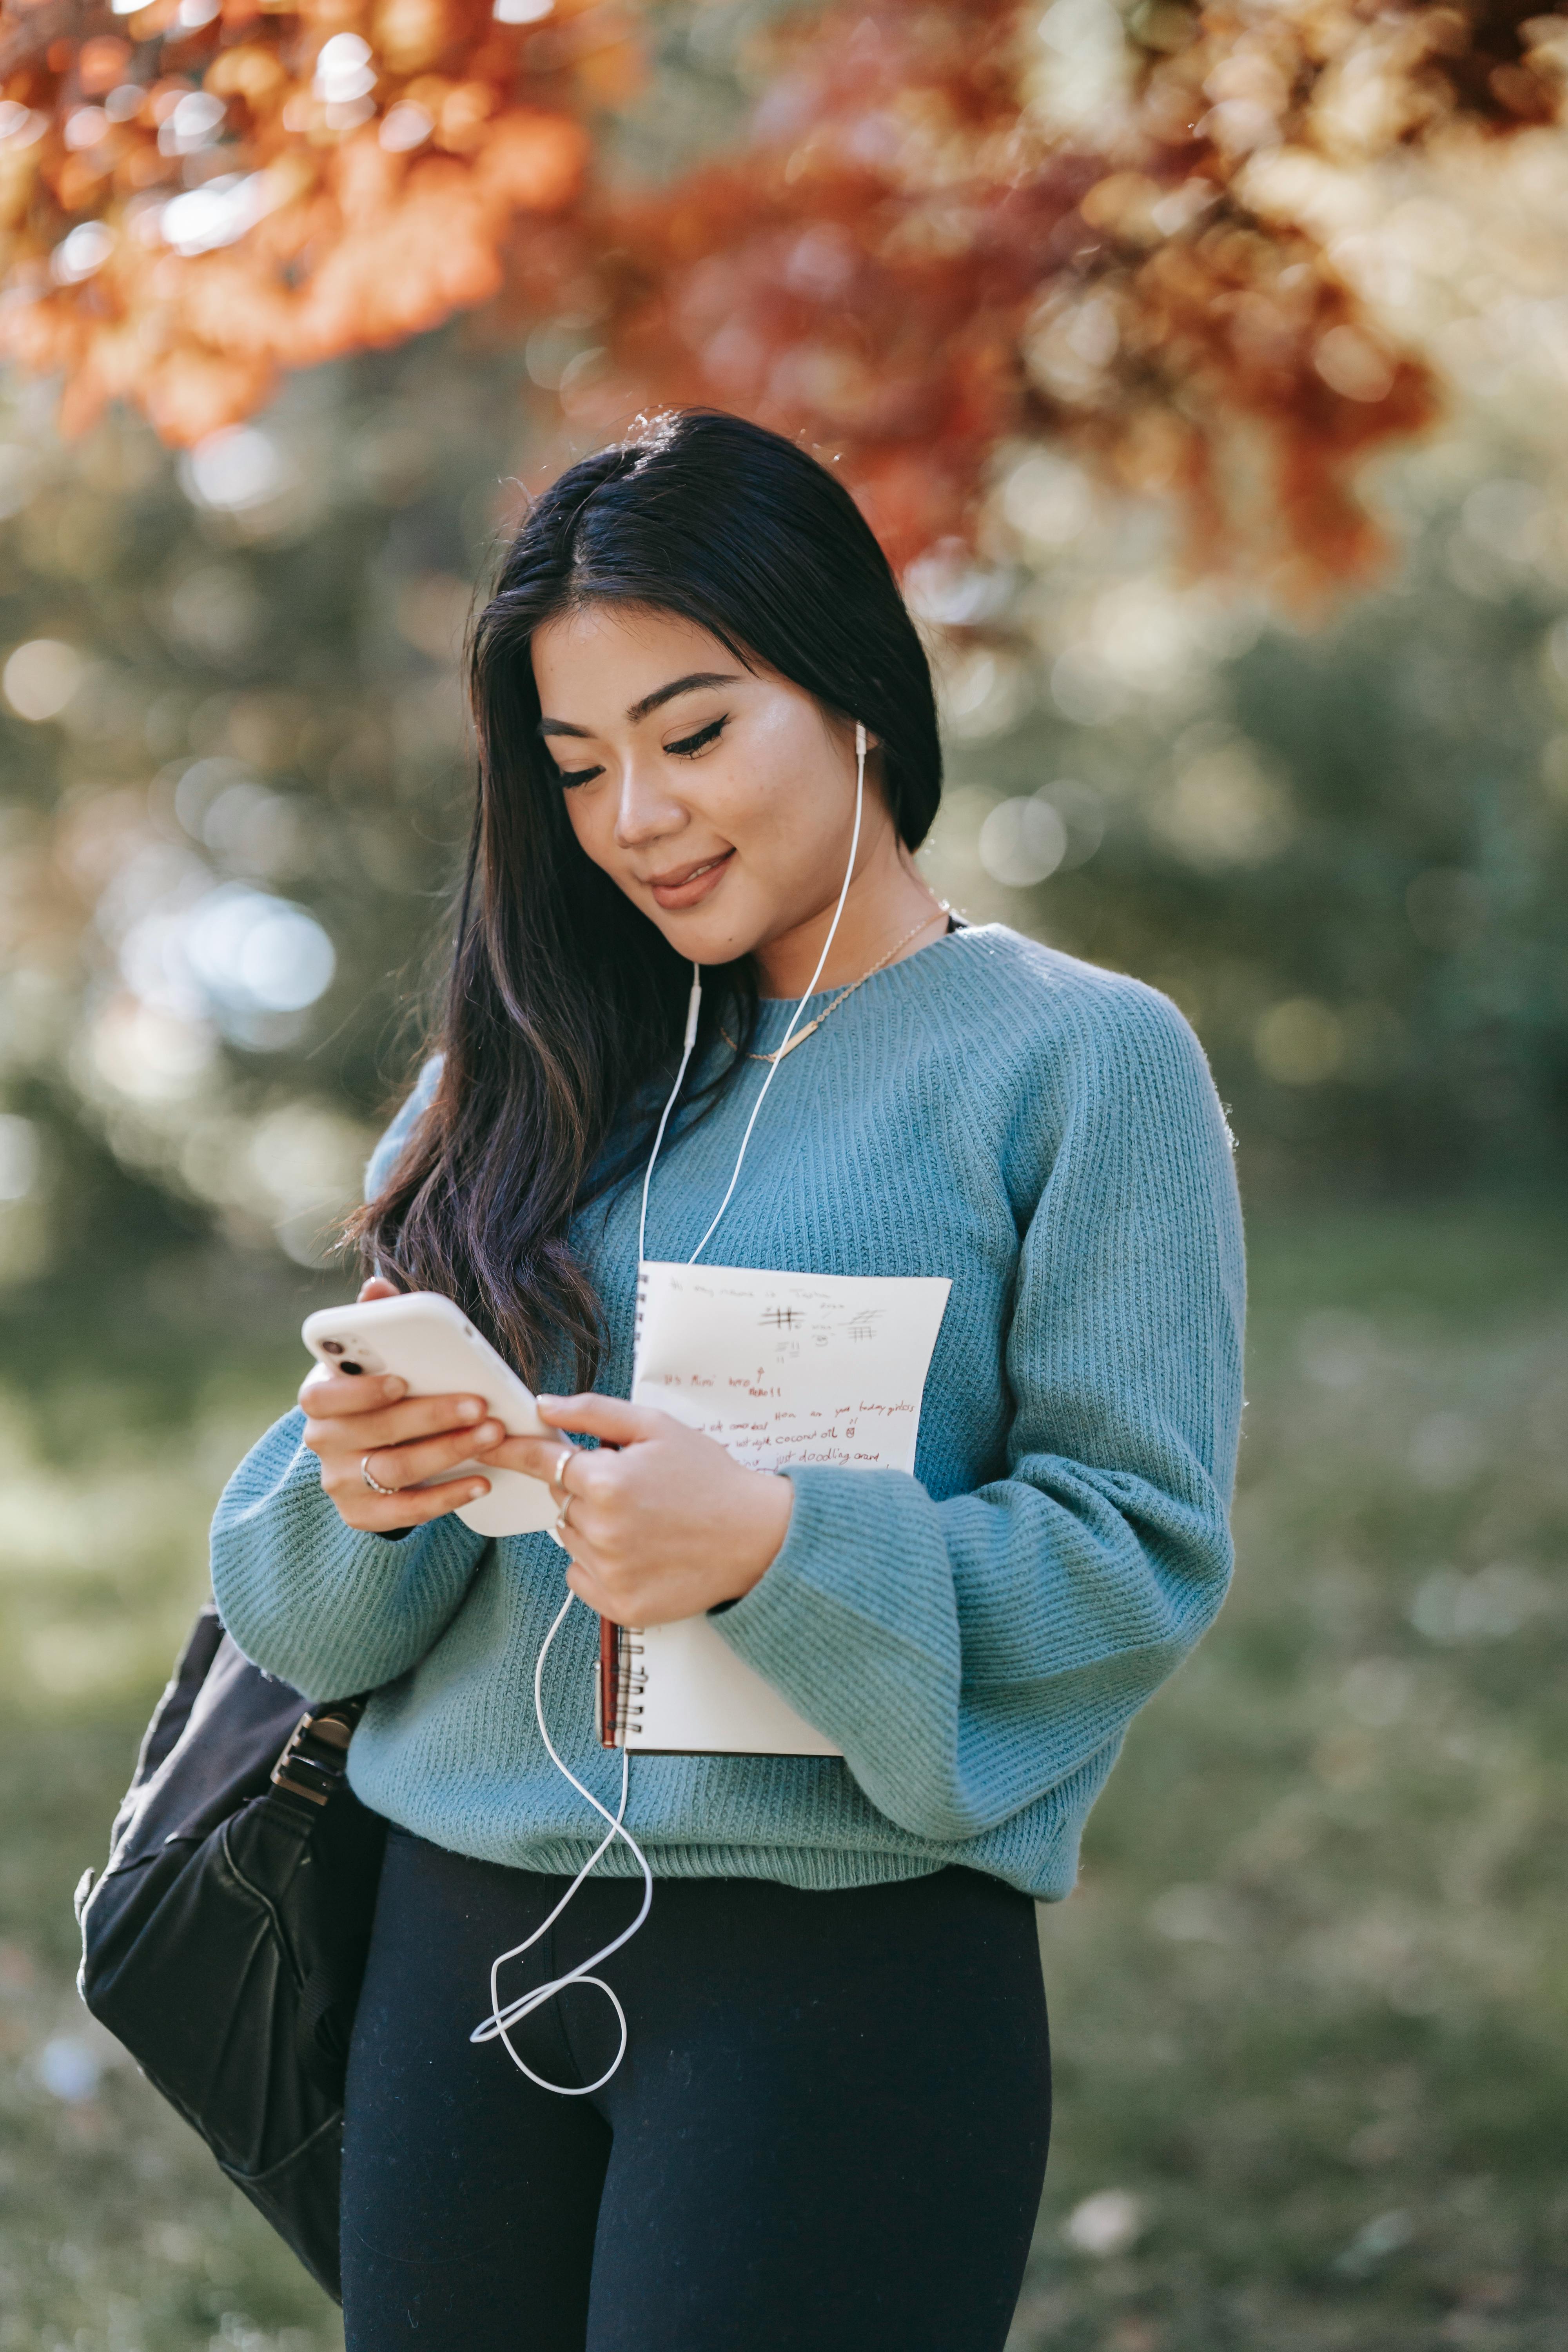 young cheerful woman listening to audio book using smartphone in park